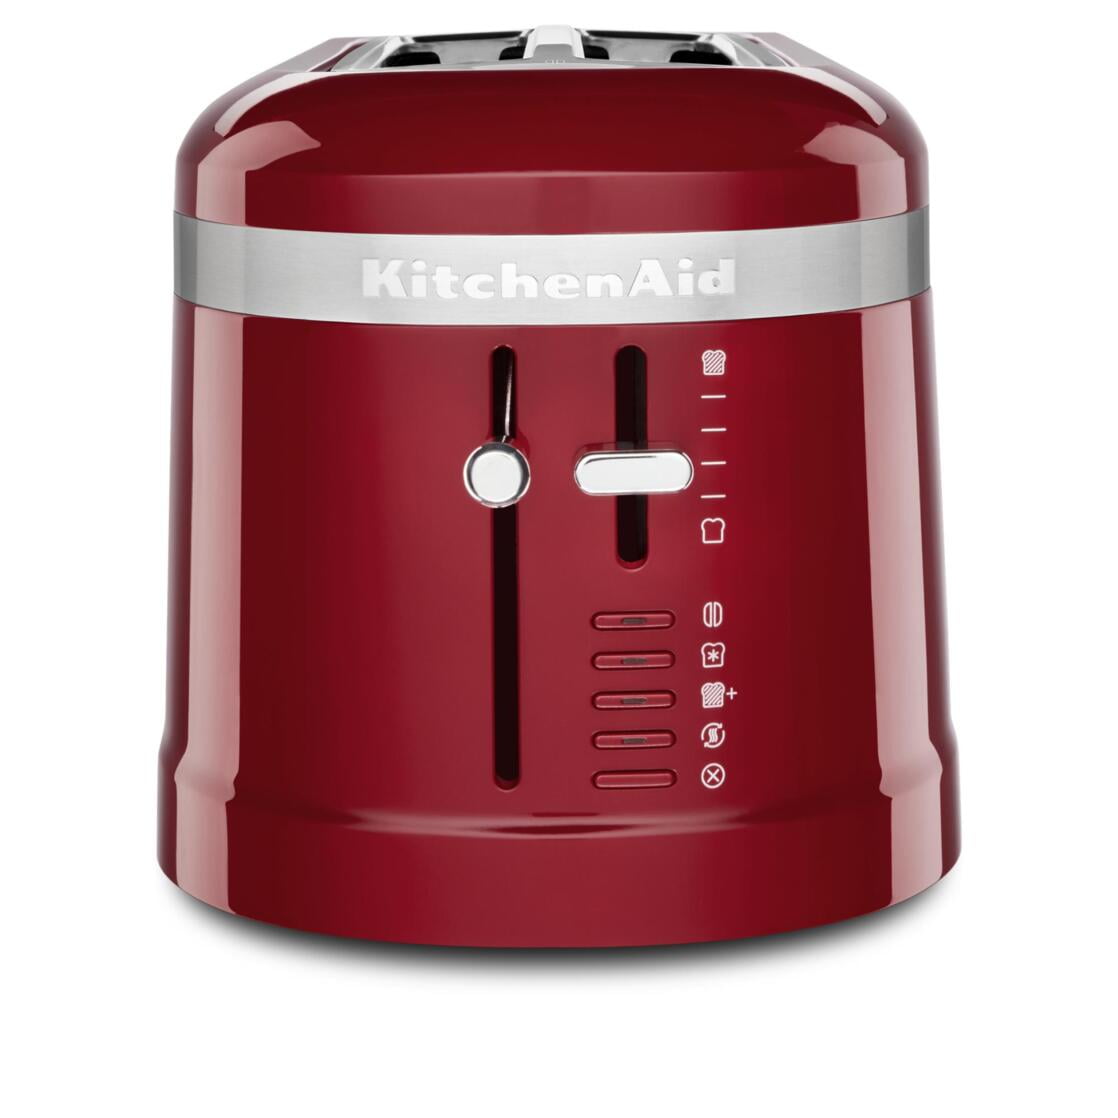 Kitchenaid 5kmt2204 eac: The Most Expensive Toaster on  🍞 